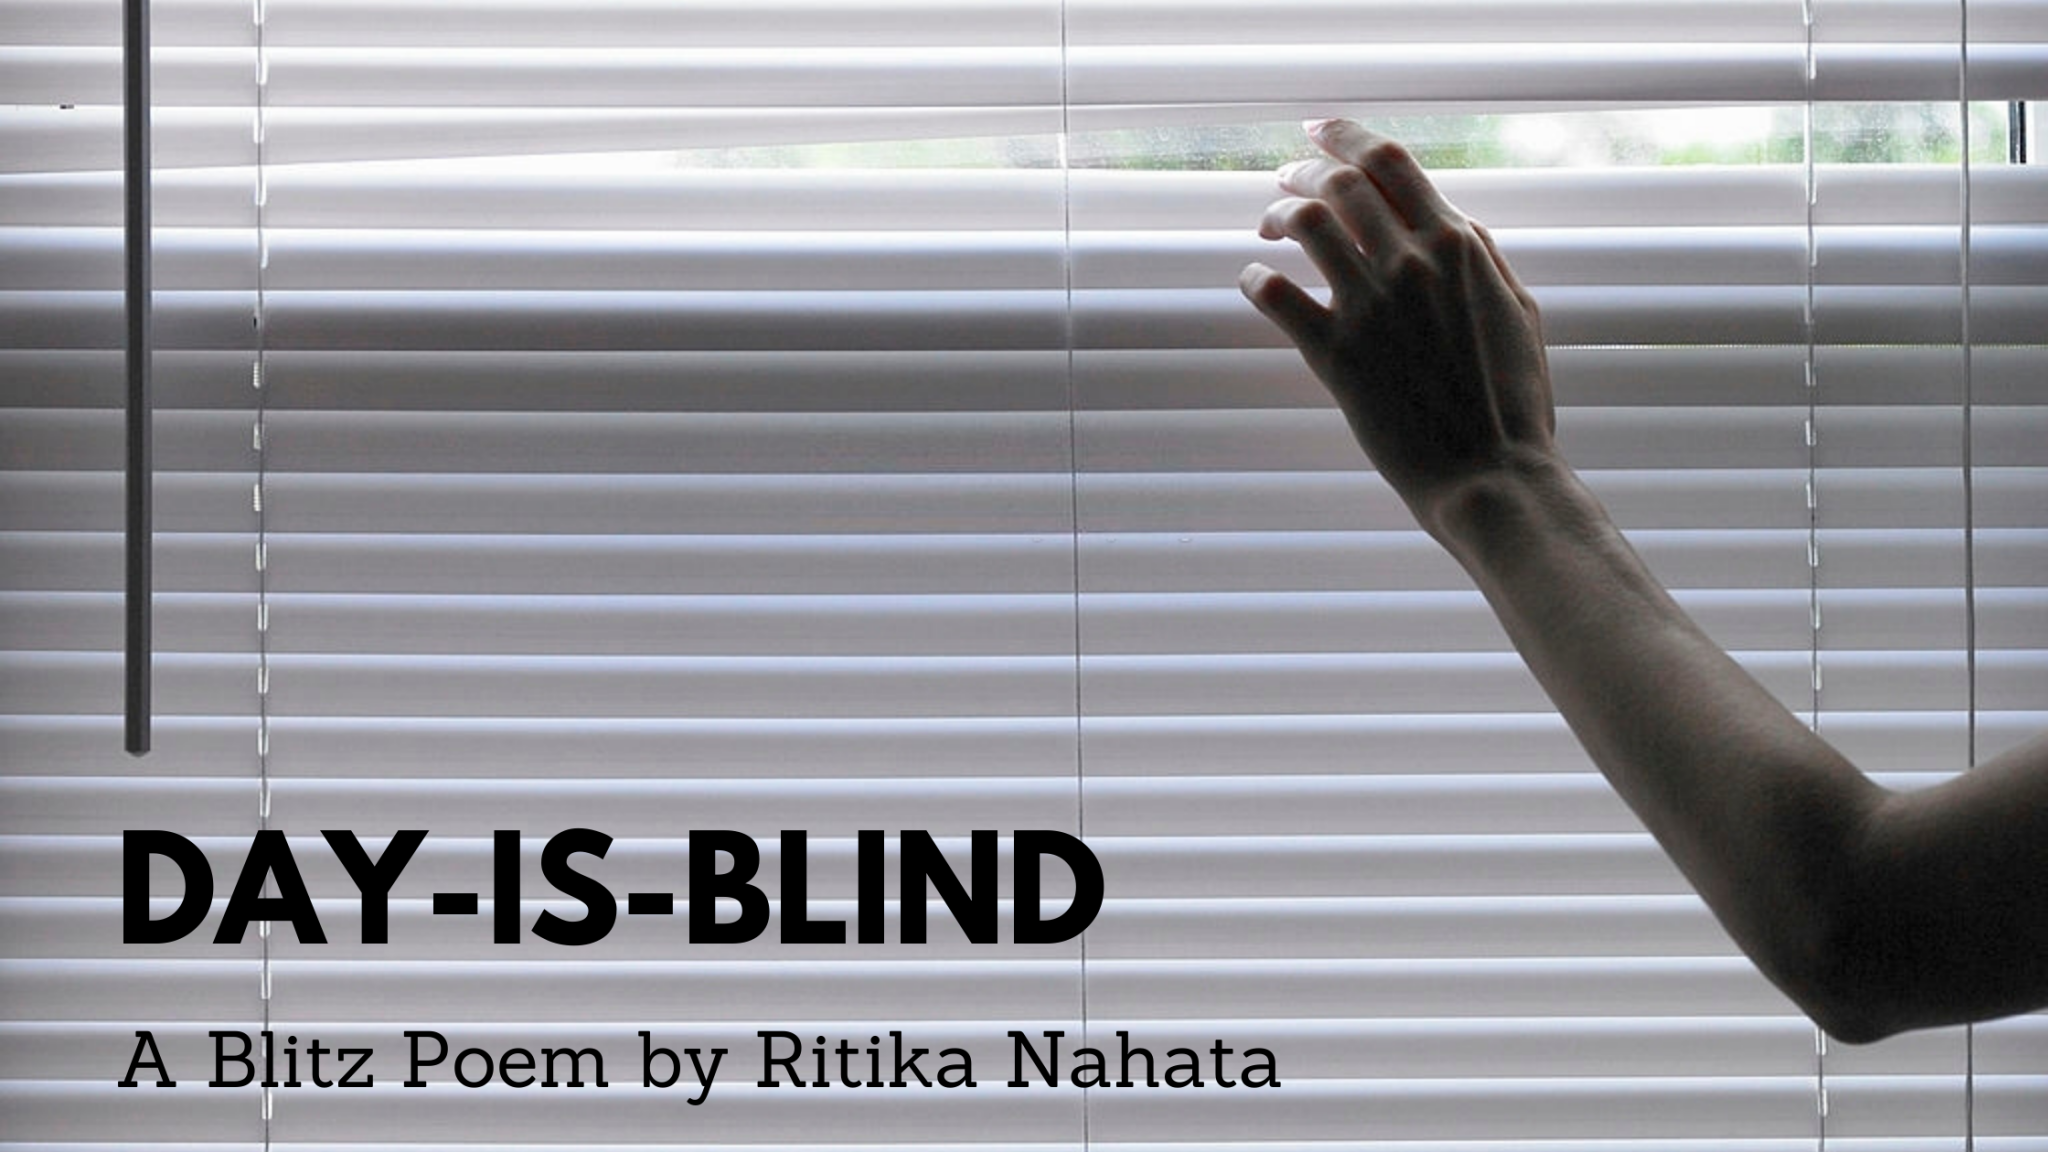 Day is Blind | A Blitz Poem by Ritika Nahata at UpDivine